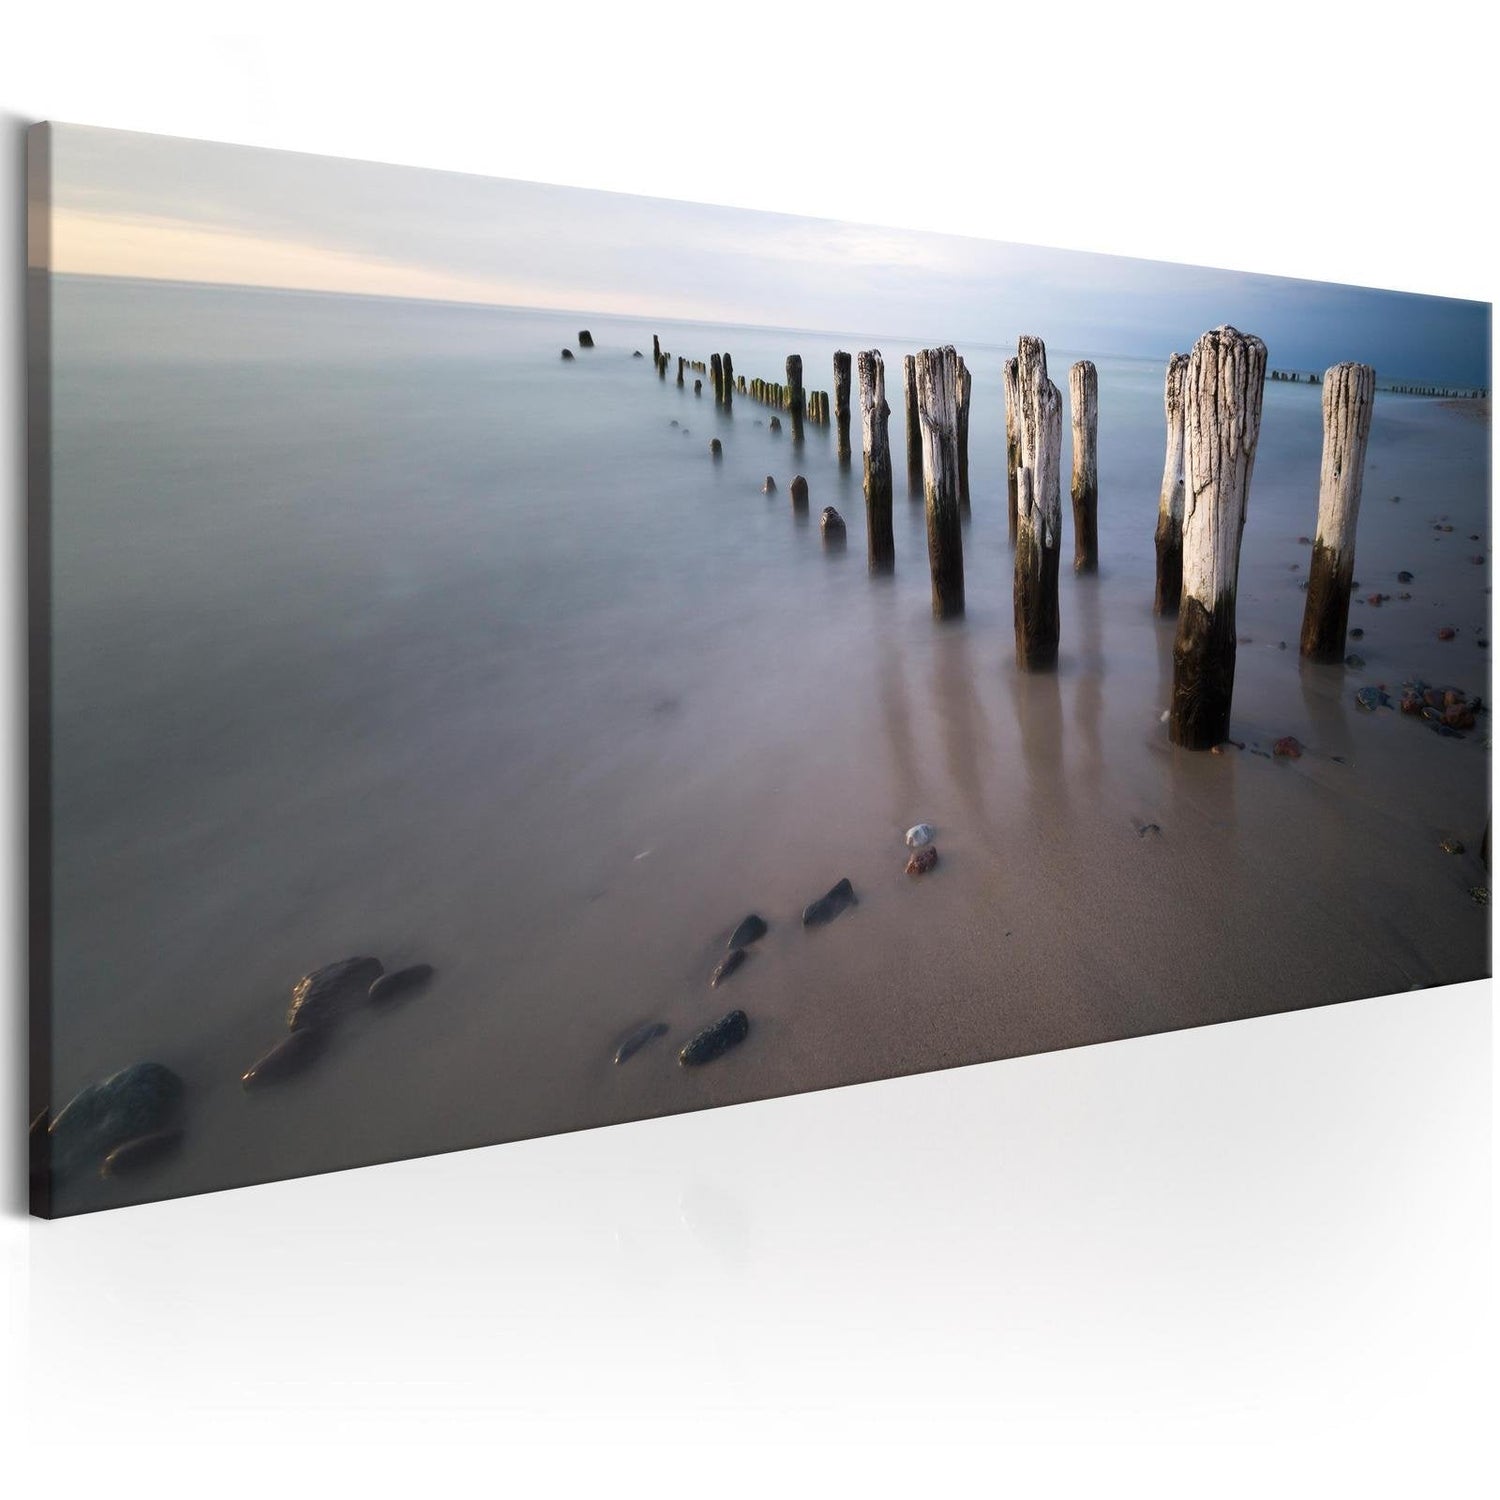 Stretched Canvas Landscape Art - The Calm Before The Storm-Tiptophomedecor